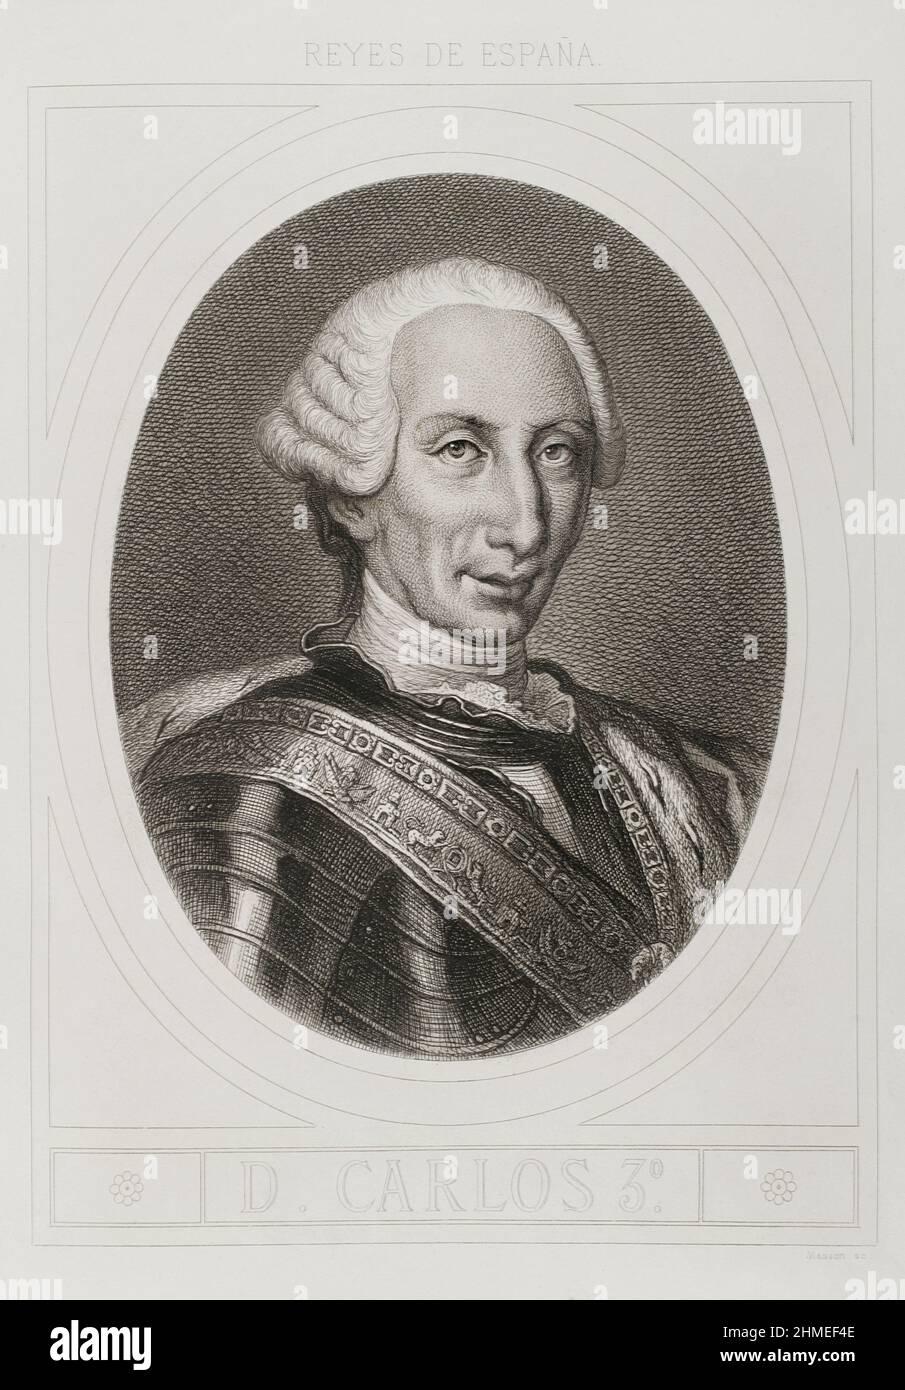 Charles III (1716-1788). King of Spain. Bourbon dynasty. Portrait. Engraving by Masson. Lithographed by Magín Pujadas. 'Historia General de España', by Modesto Lafuente. Volume IV. Published in Barcelona, 1879. Stock Photo